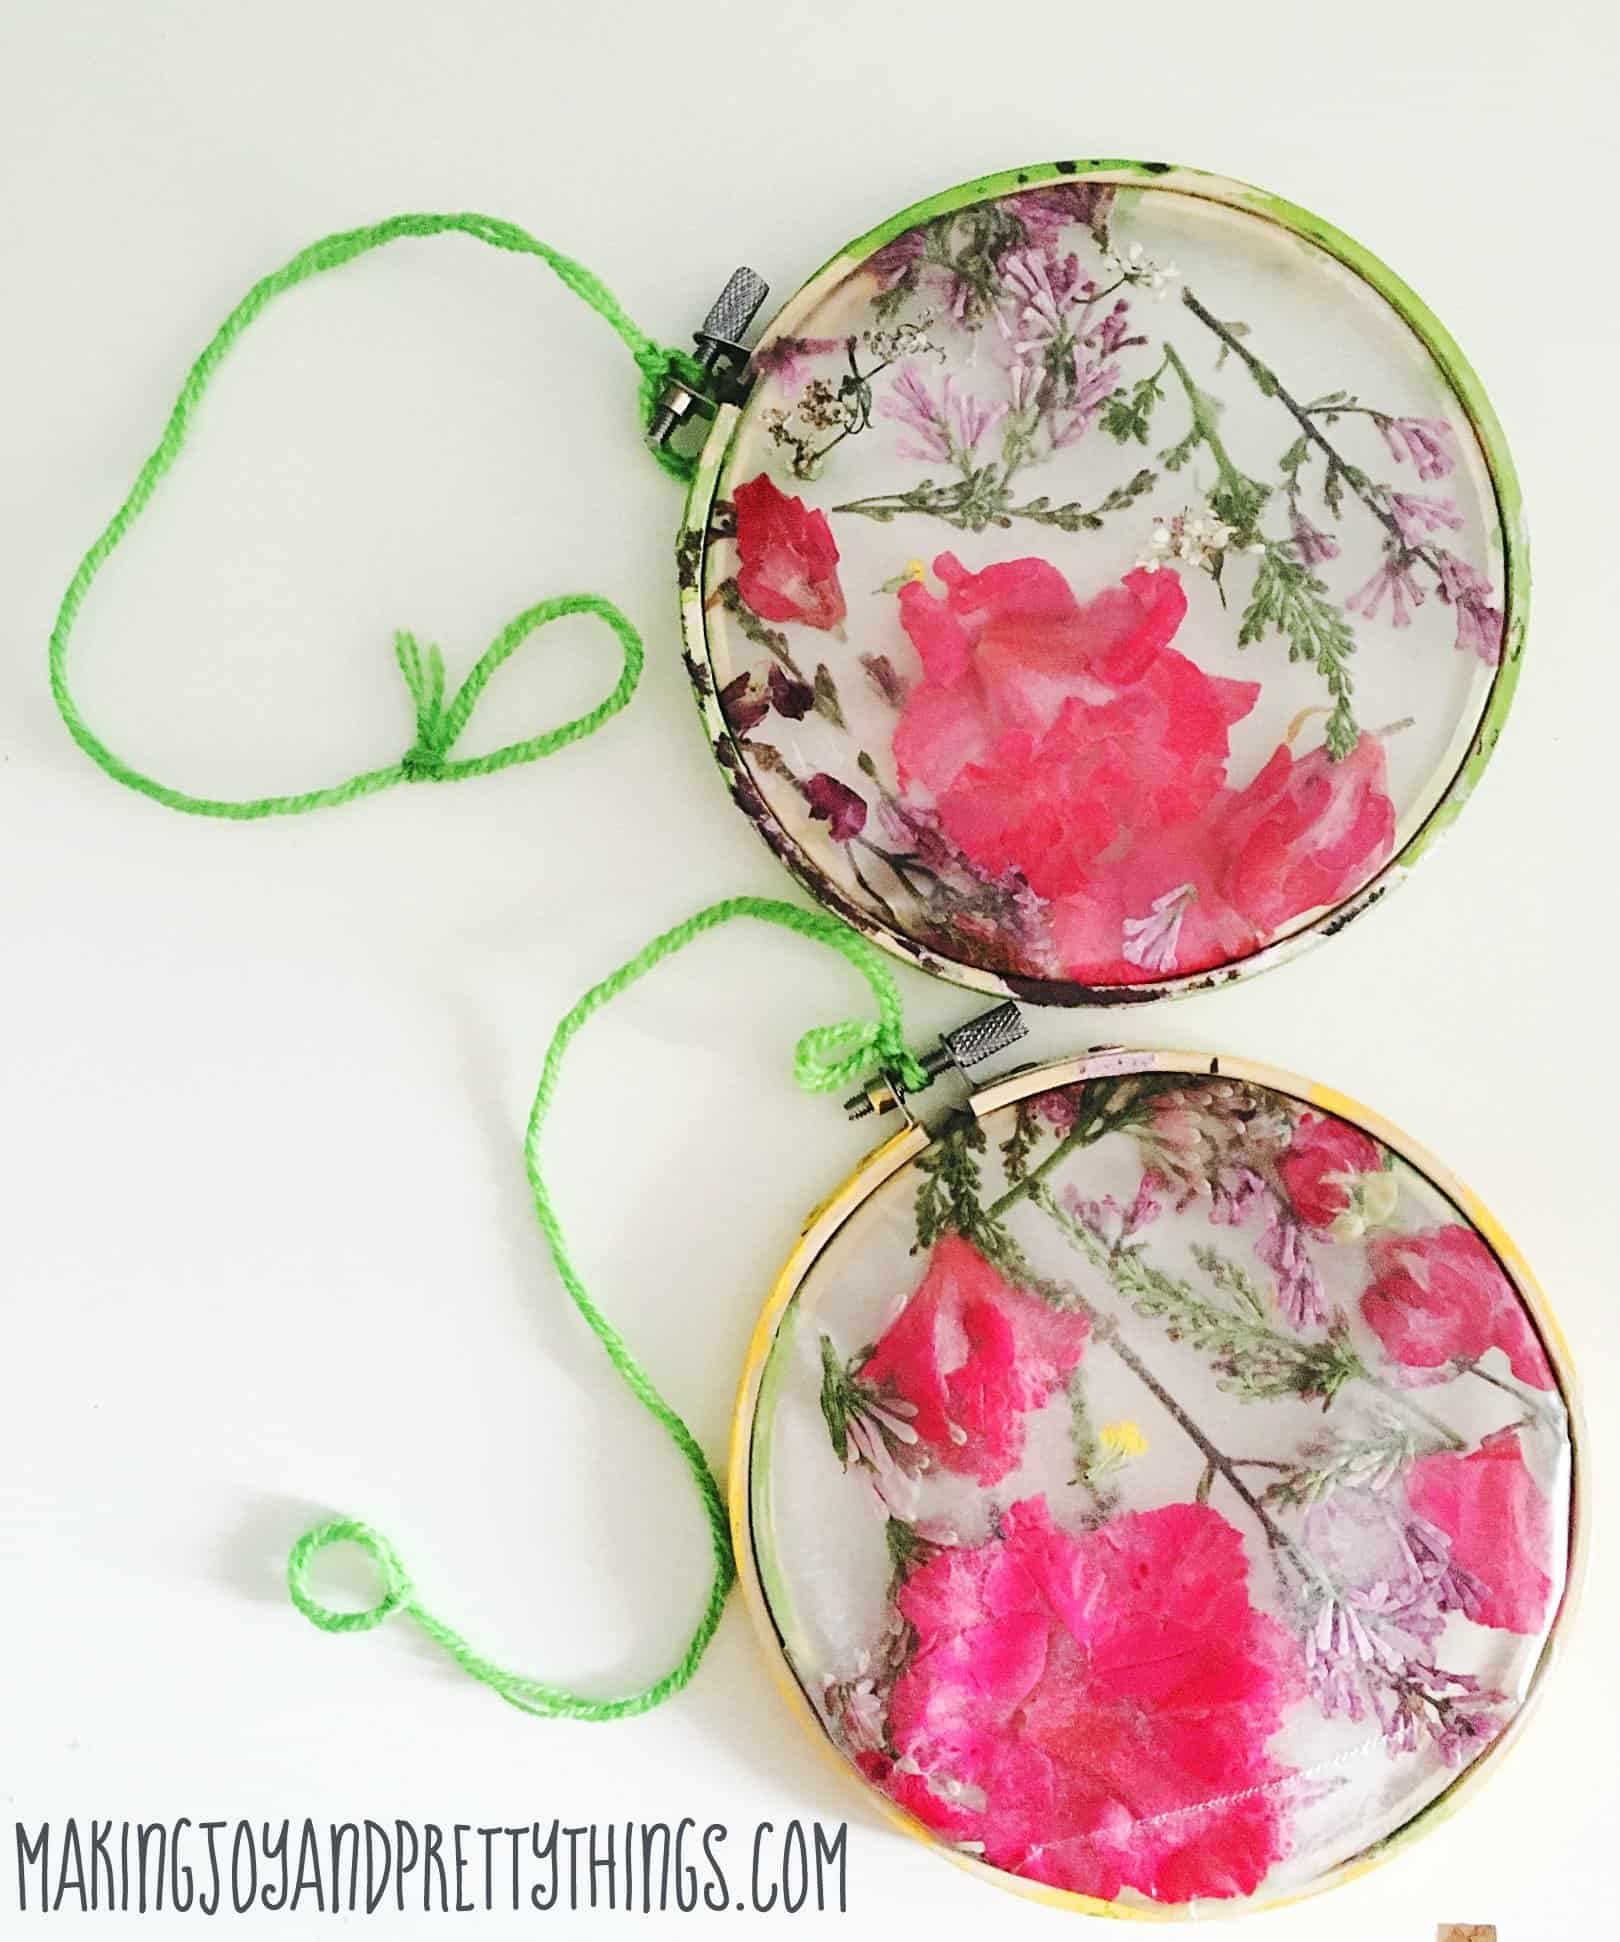 A pair of pressed flower suncatchers, made with pink and purple flower petals pressed in craft contact paper and held in place with small wooden embroidery hoops that have been painted green and yellow. Strings of green yarn hang from the top of each suncatcher.